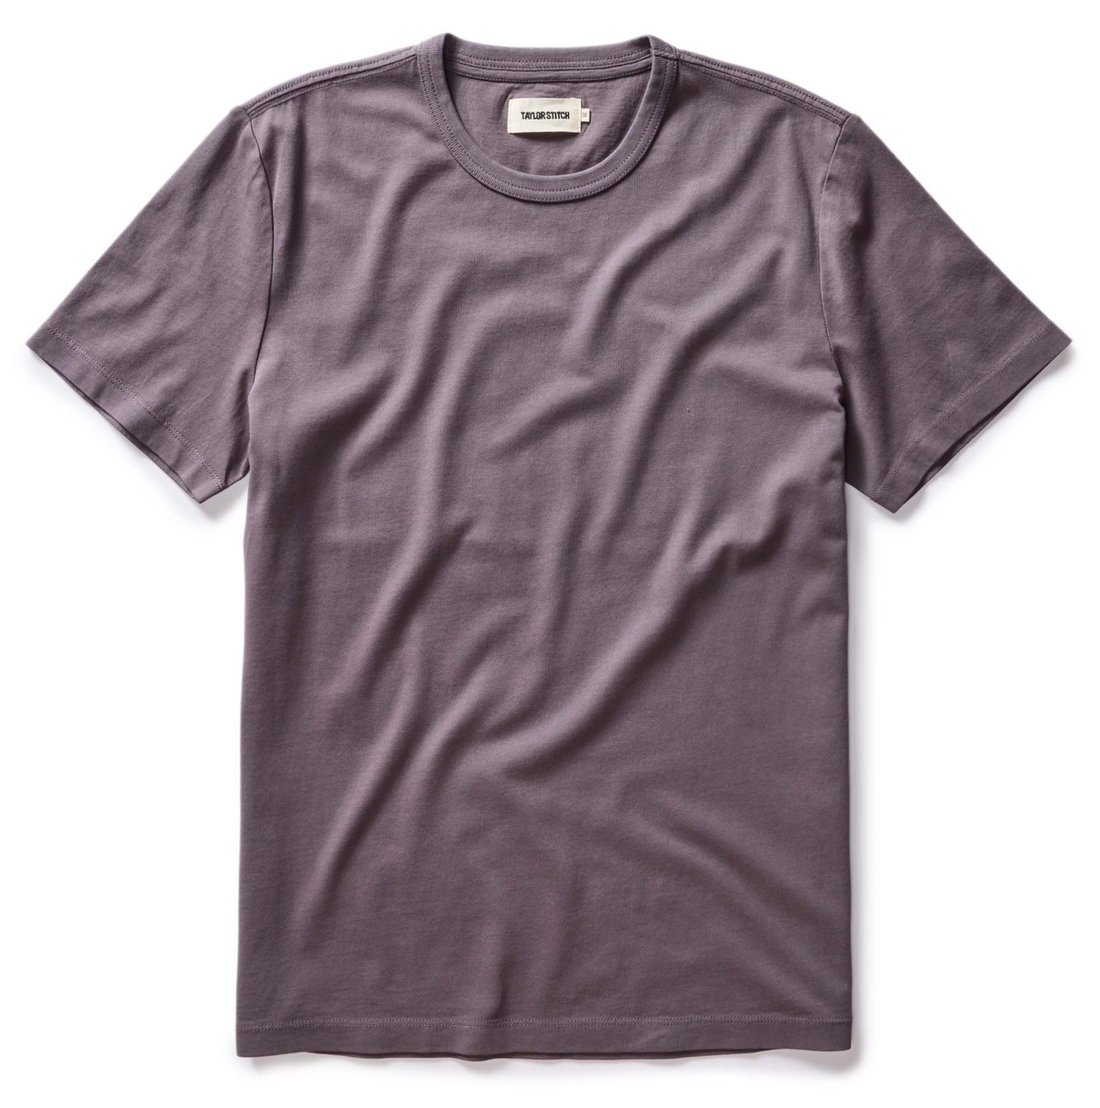 Taylor Stitch - The Organic Cotton Tee in Dried Plum